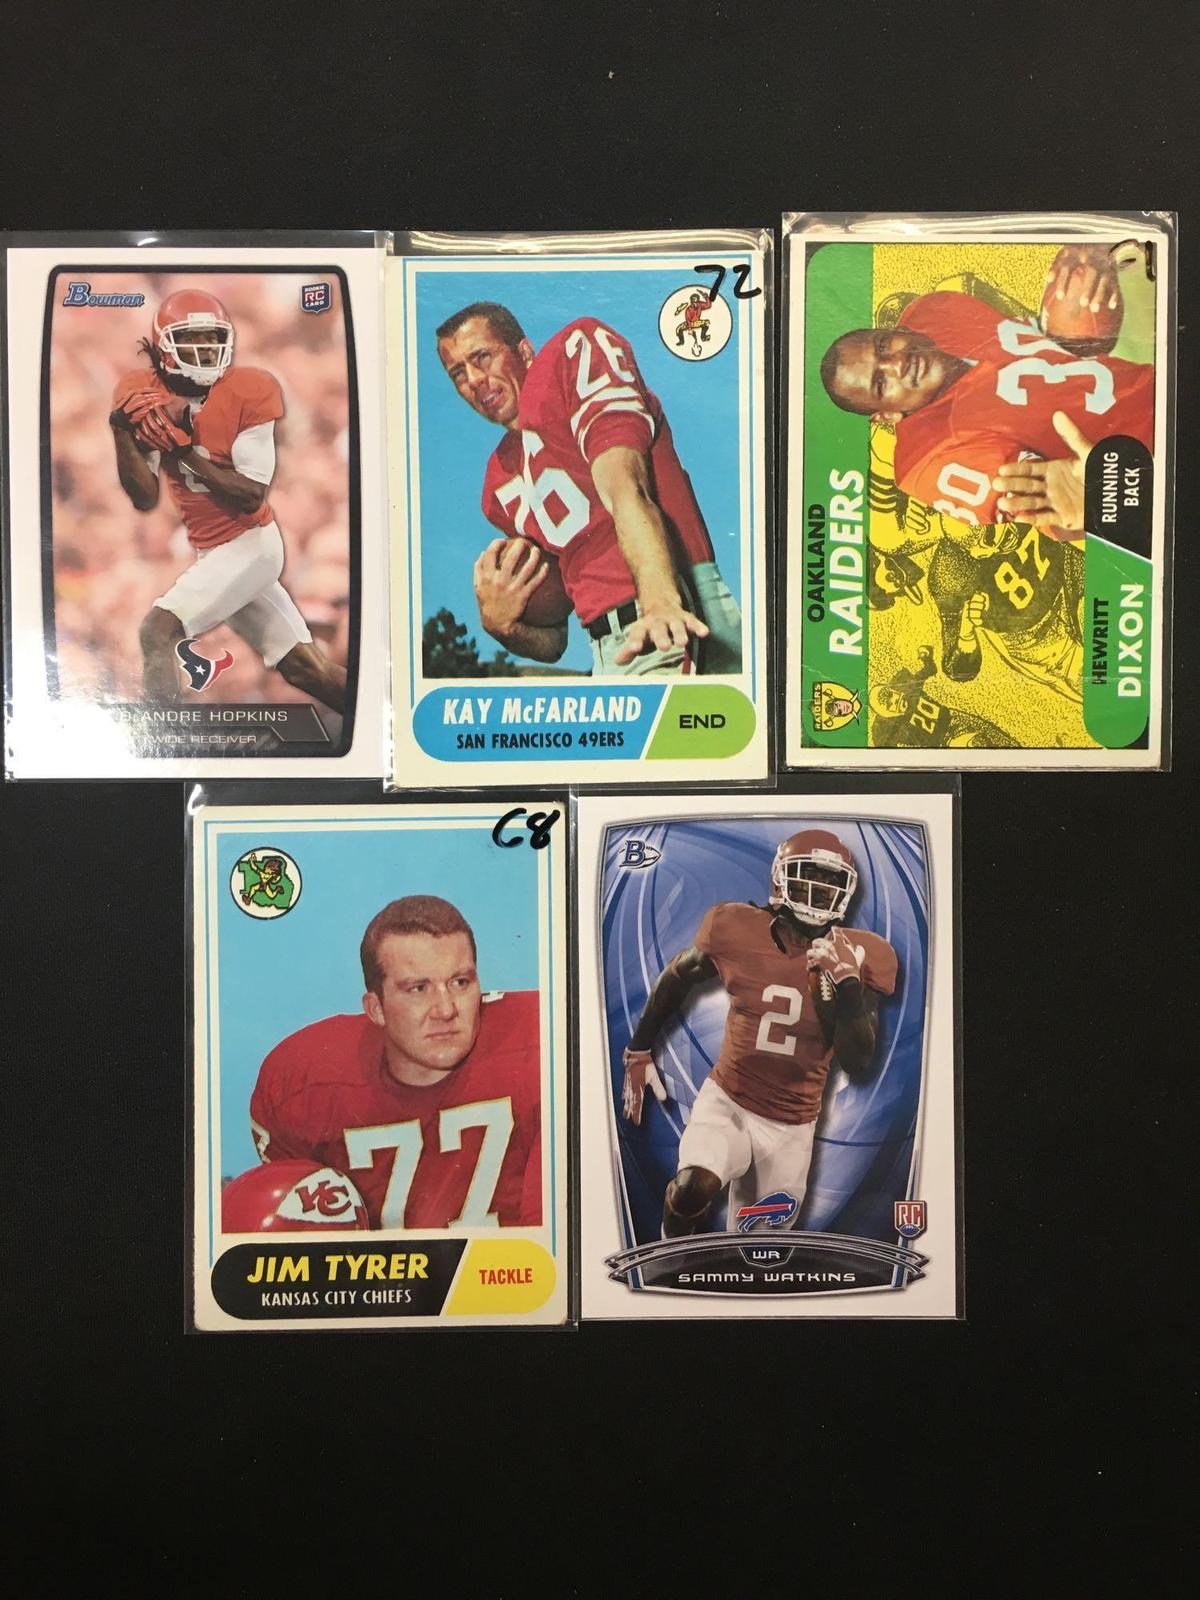 Lot of 5 Football Insert, Serial Numbered, and Star Cards!